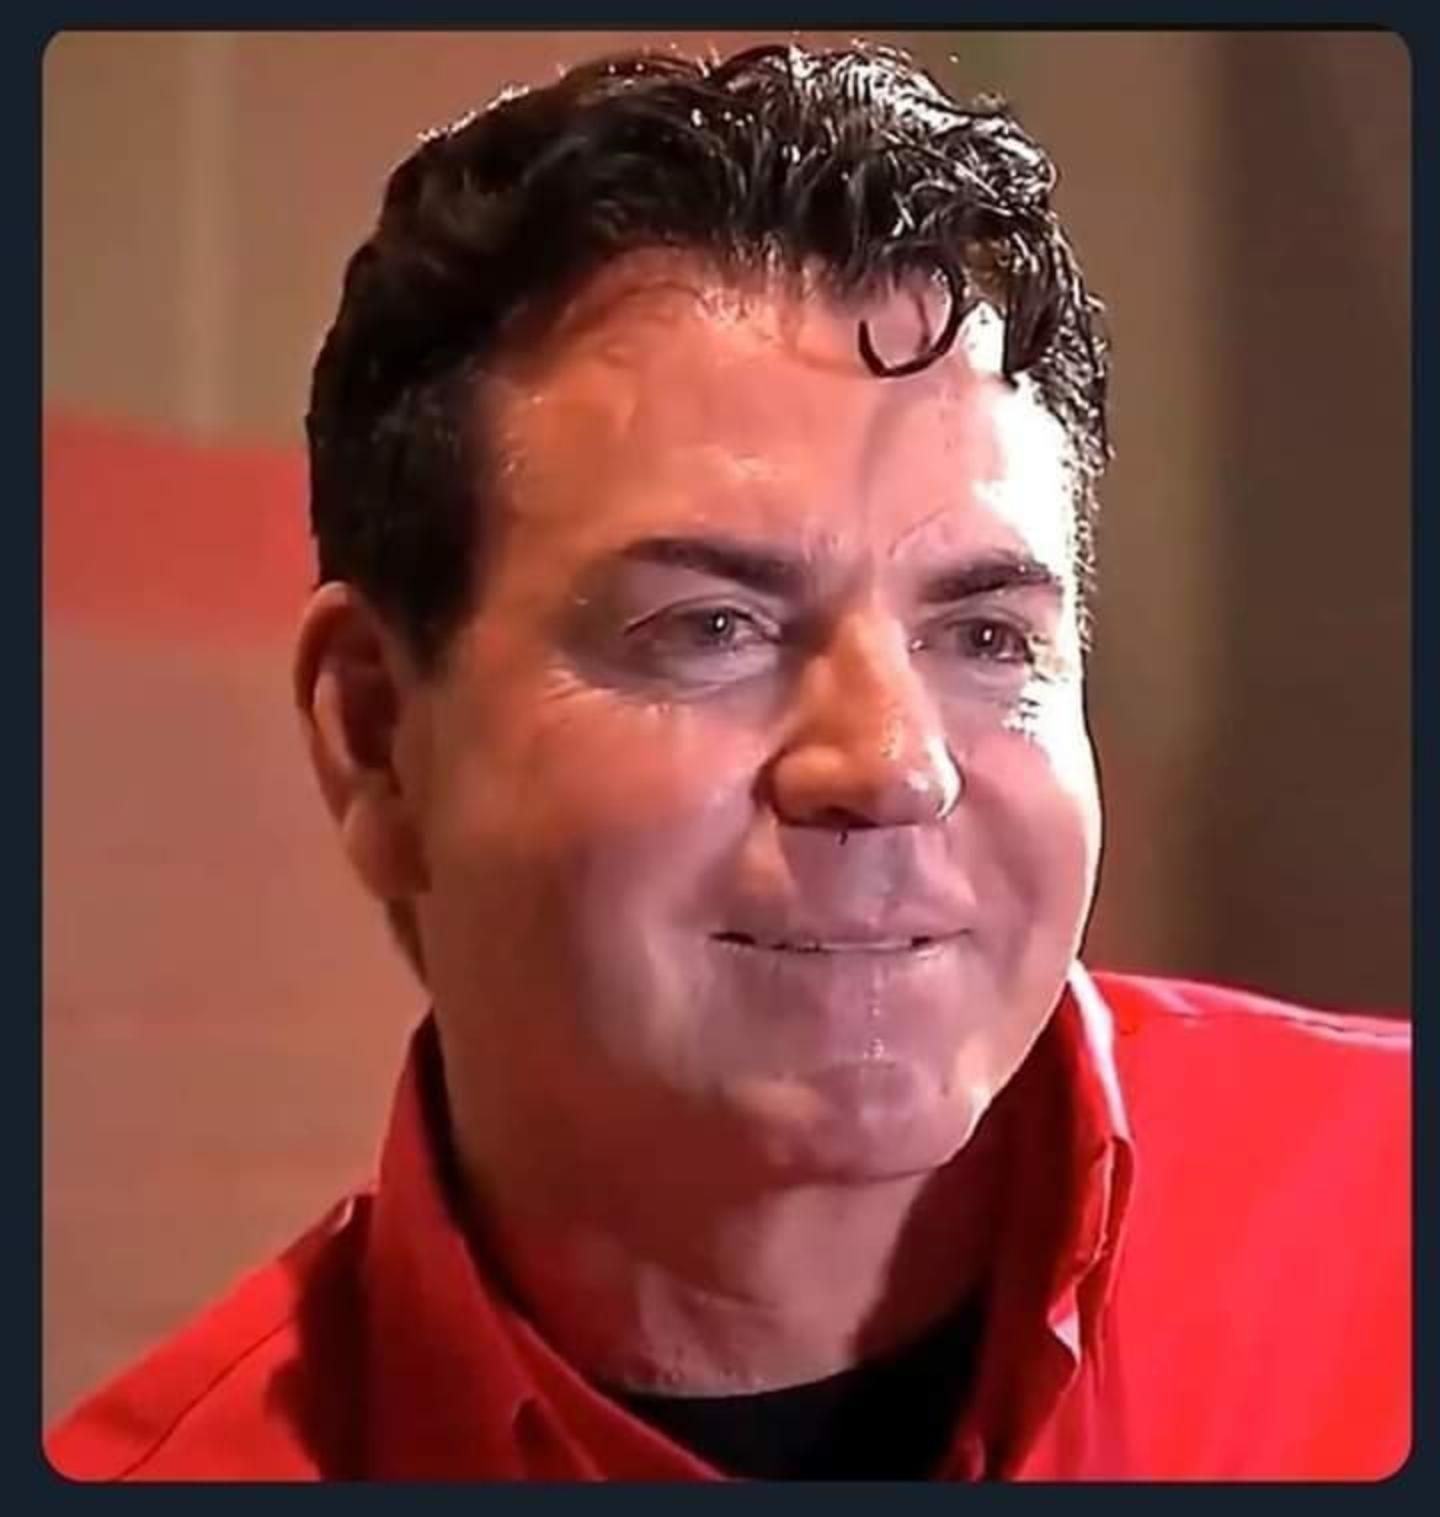 Papa John looks like the dude who gets bit in a zombie movie and tries to hide it from the group...